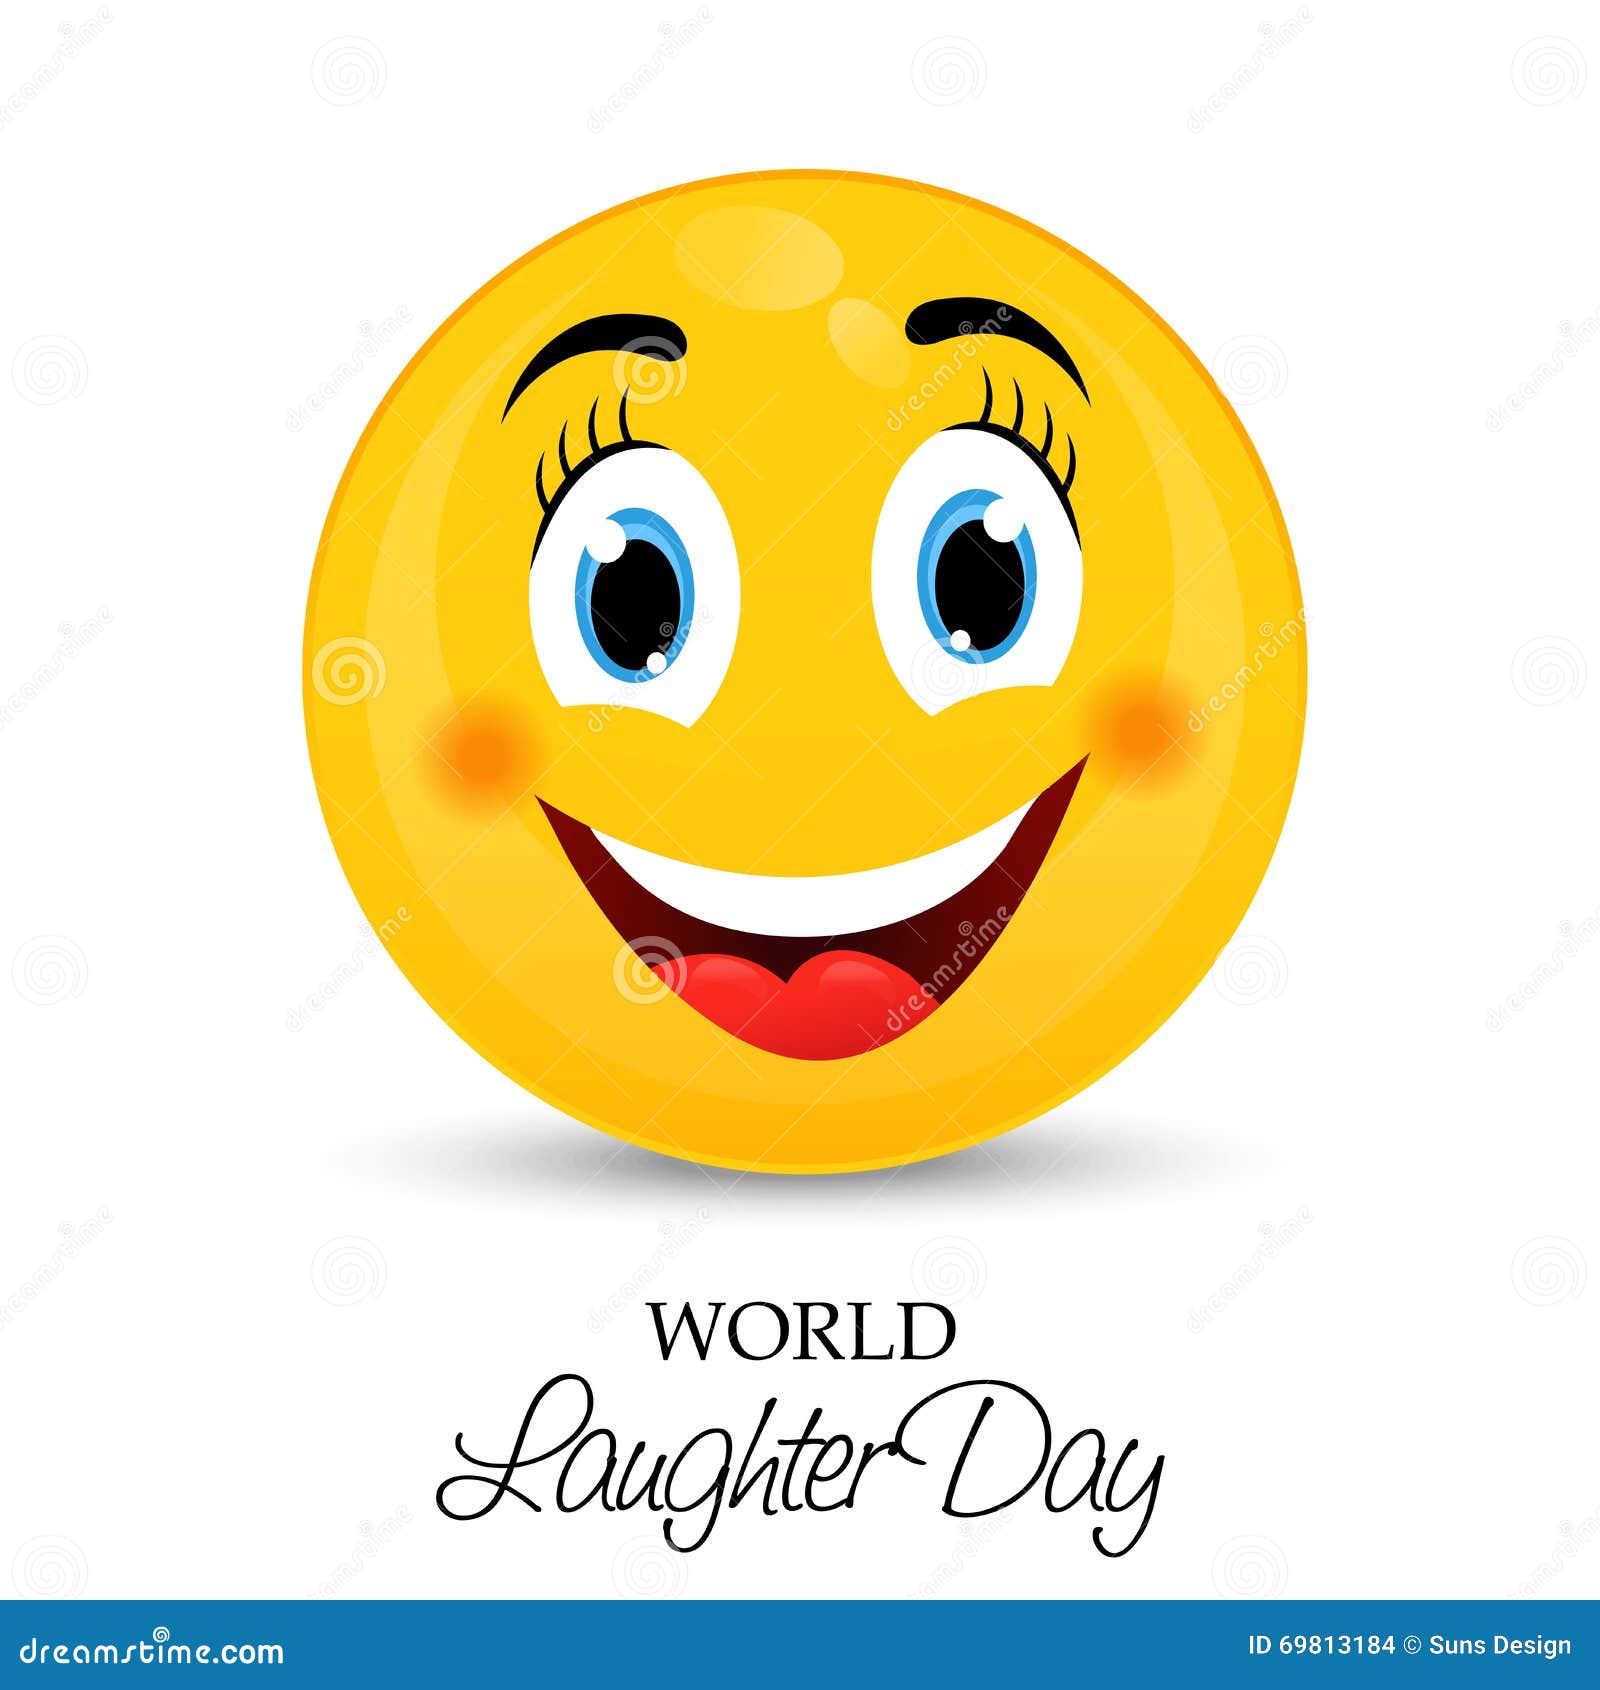 Laughter Day stock illustration. Illustration of text - 69813184